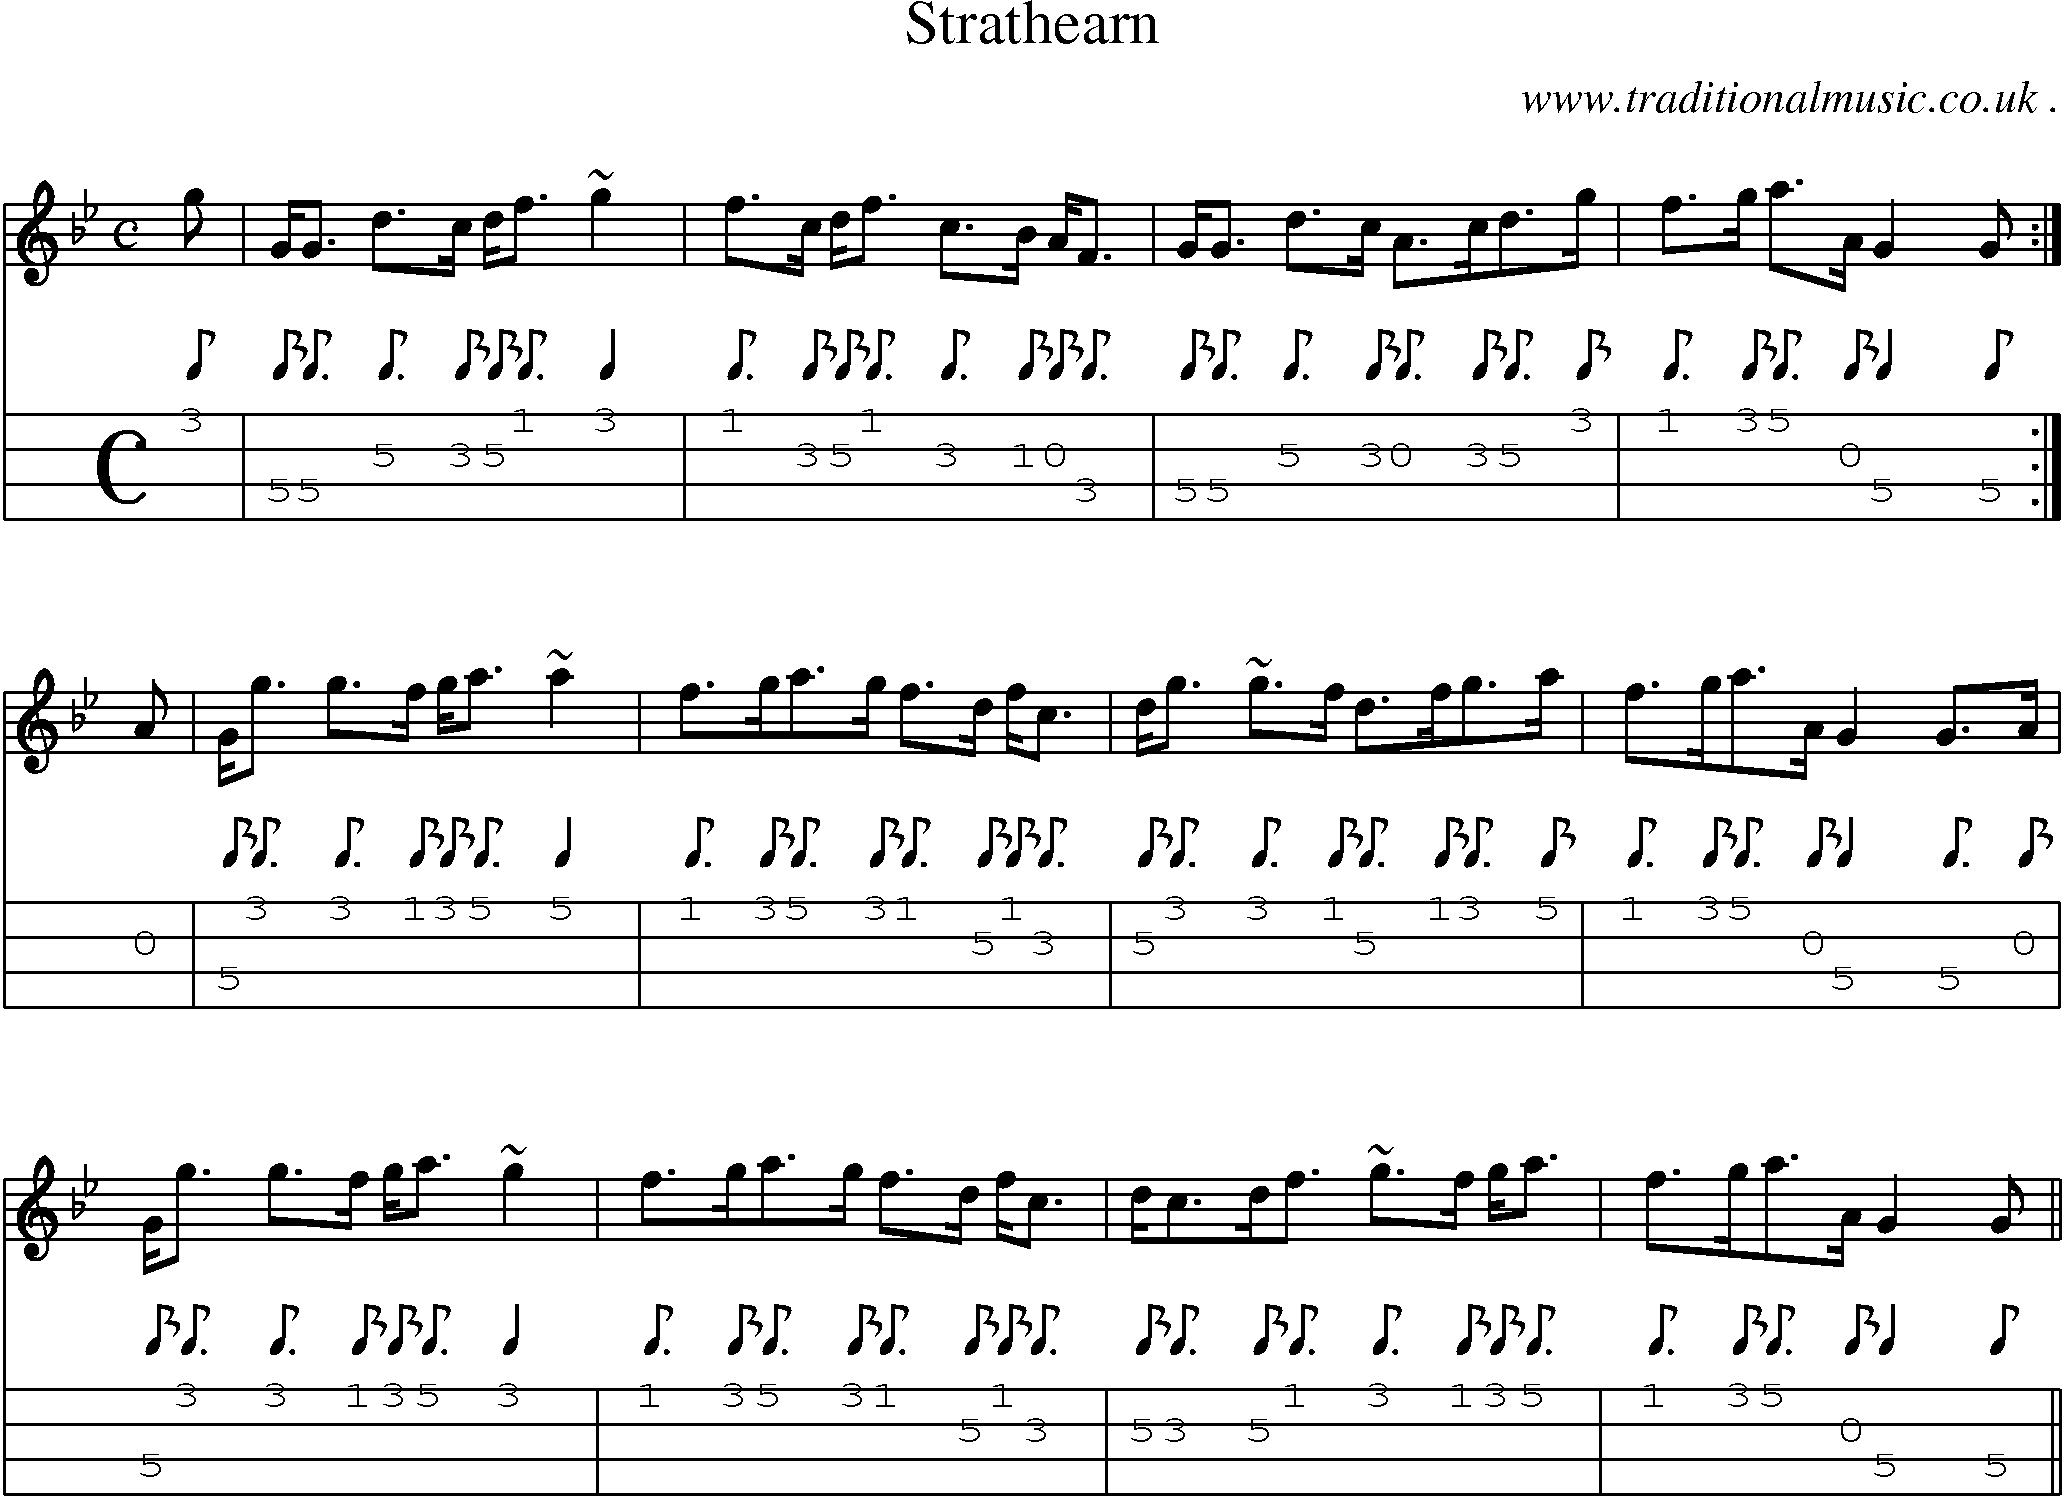 Sheet-music  score, Chords and Mandolin Tabs for Strathearn